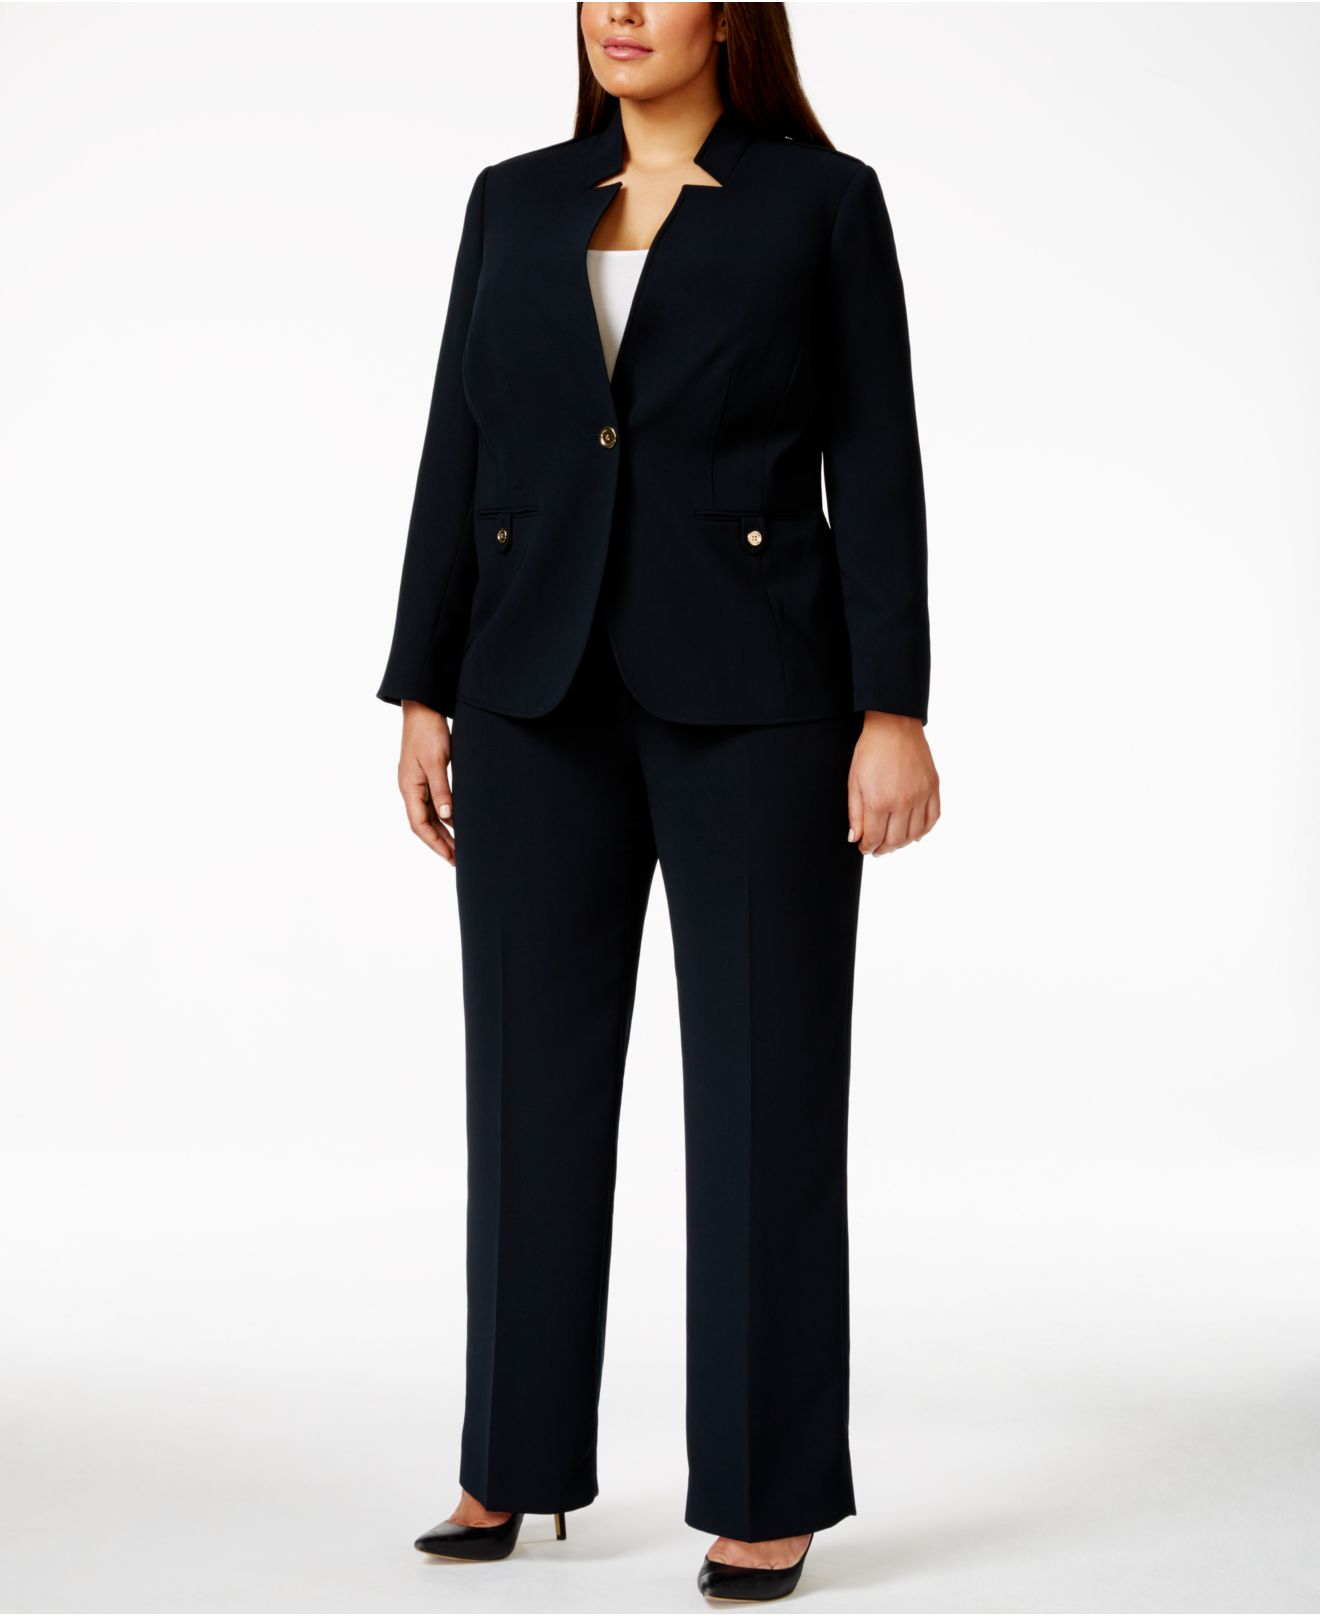 Tahari Plus Size Military-style Jacket Pant Suit in Blue | Lyst